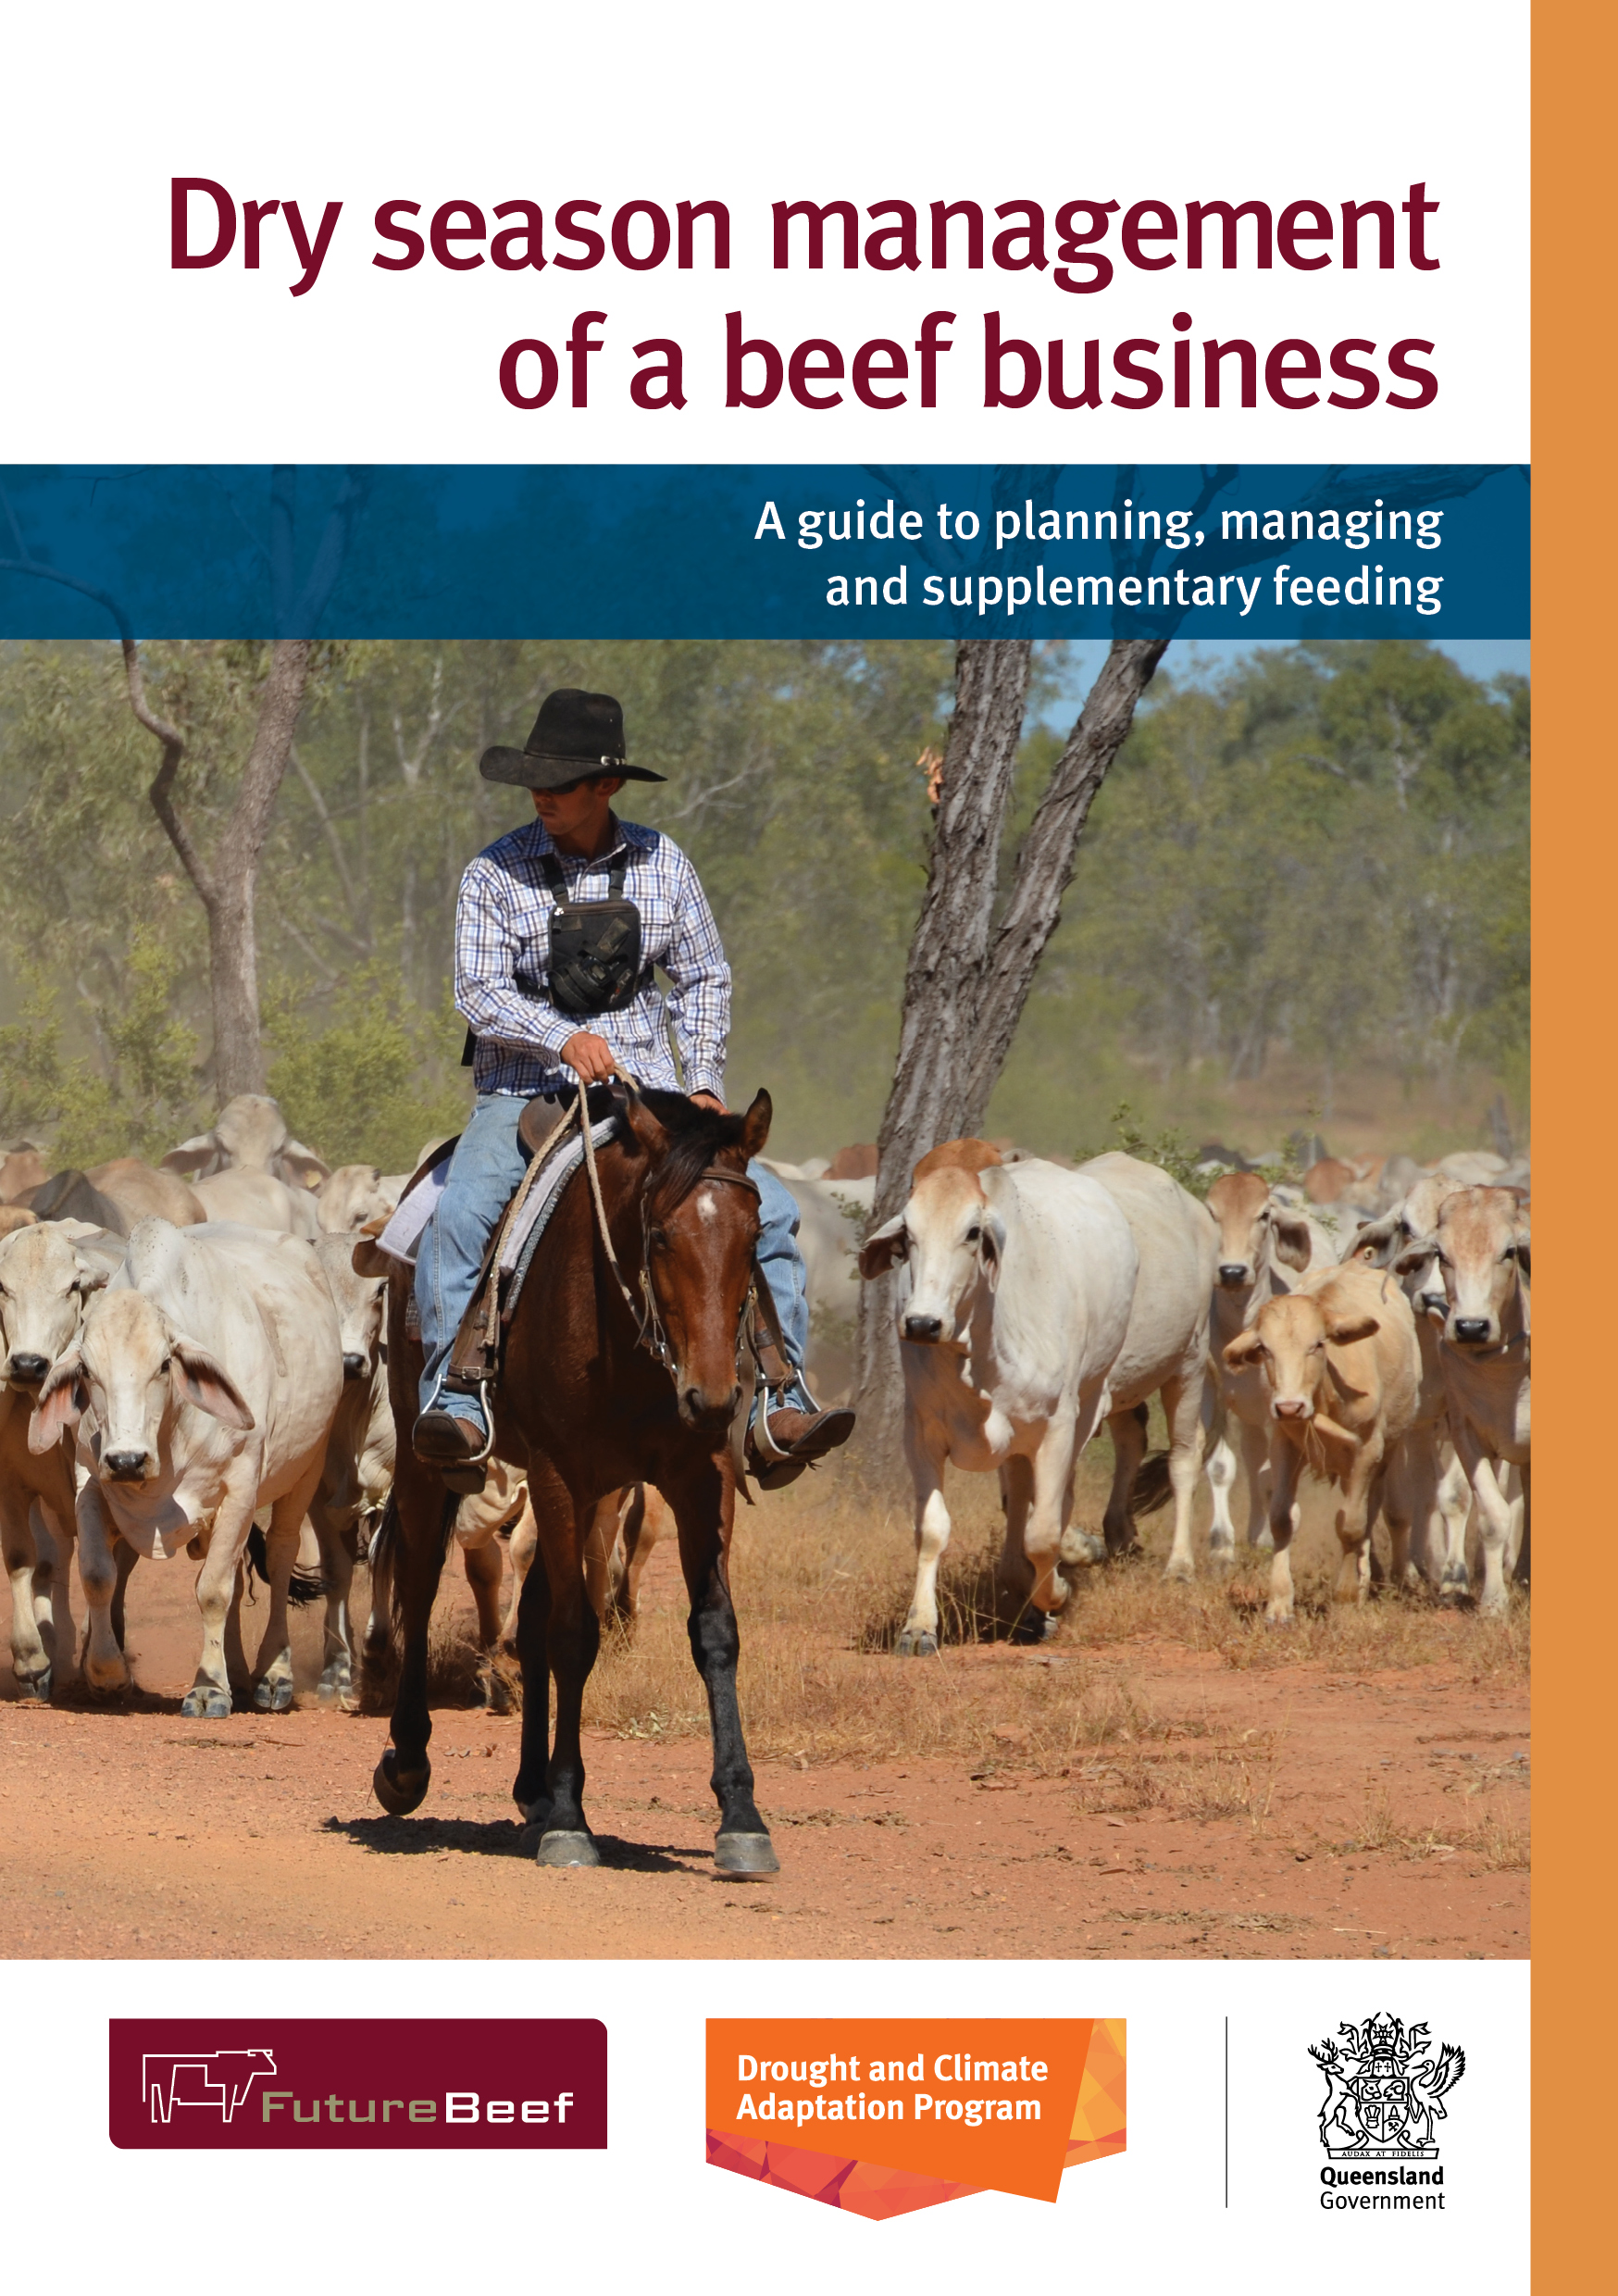 Dry season management of a beef business